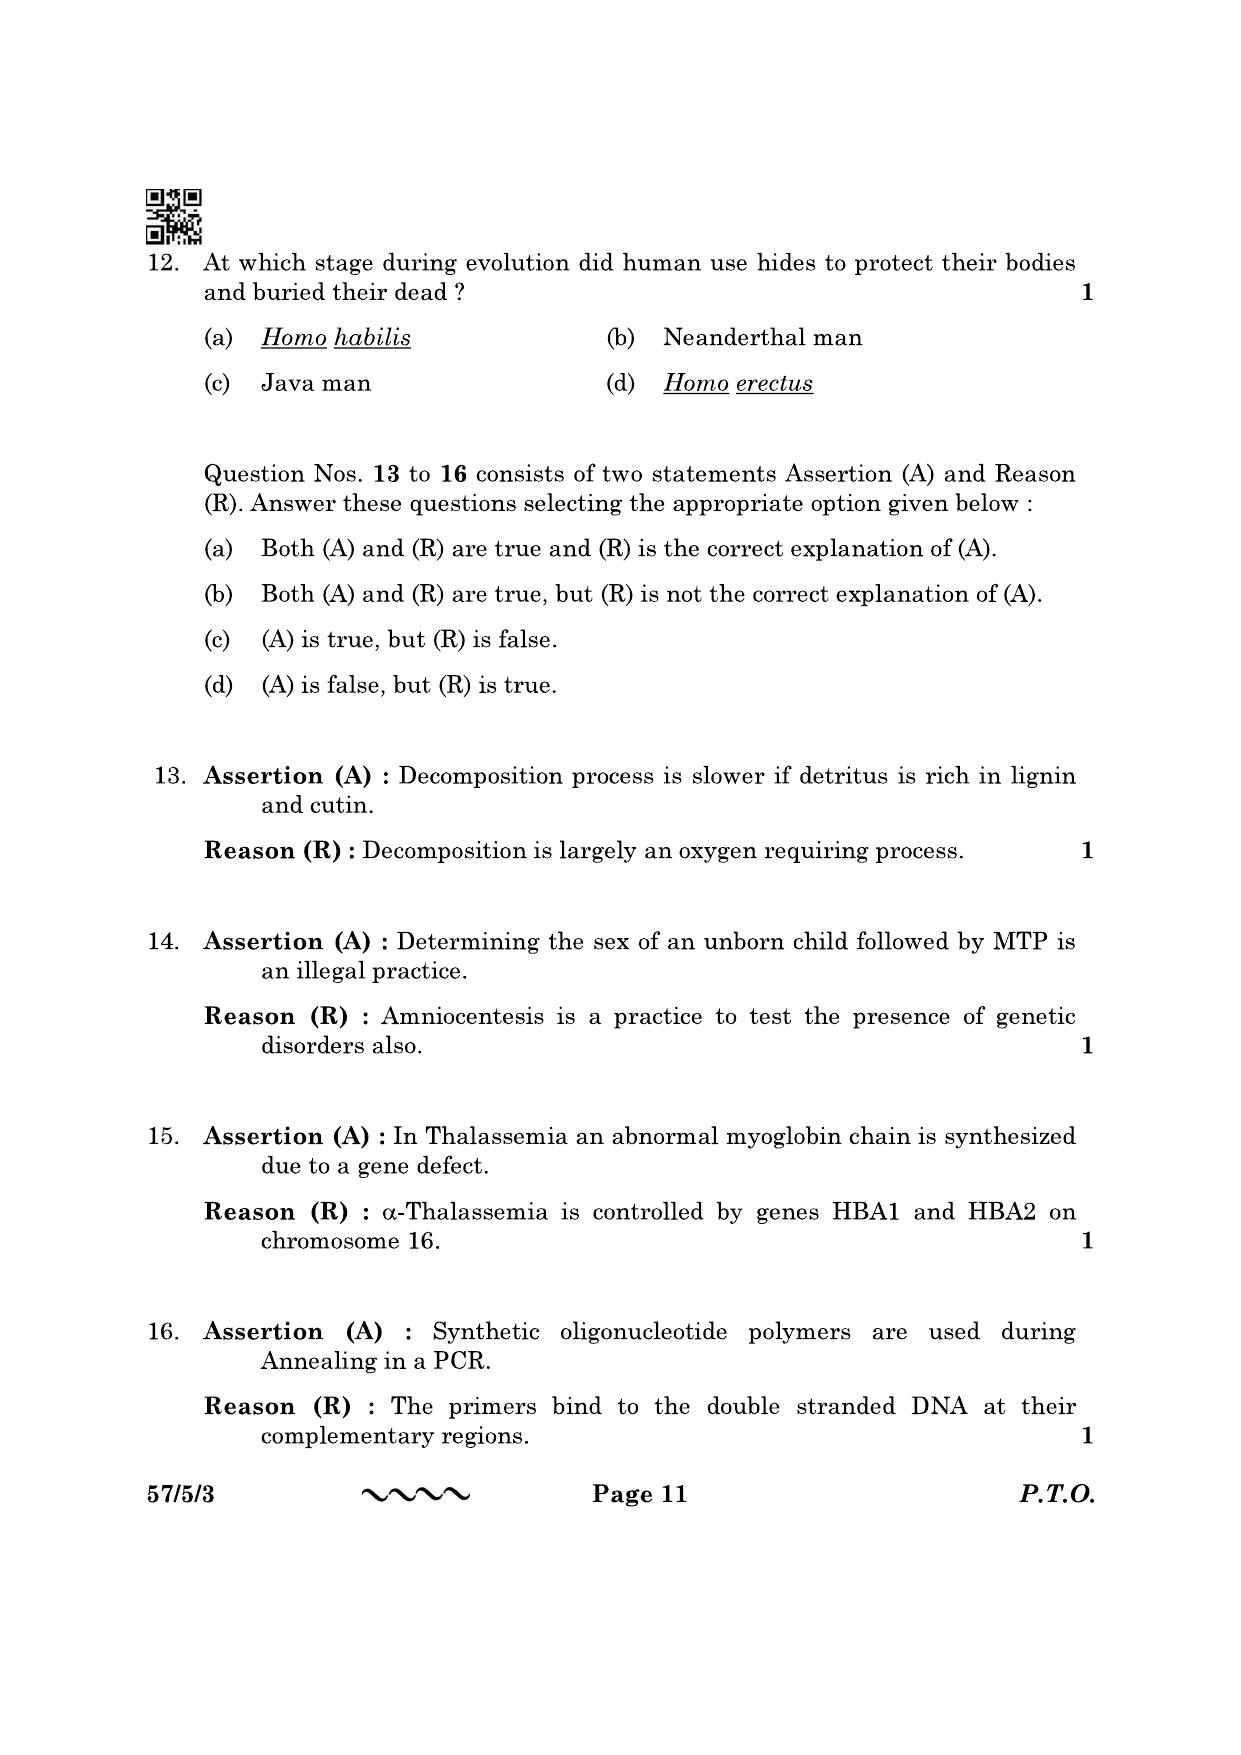 CBSE Class 12 57-5-3 Biology 2023 Question Paper - Page 11